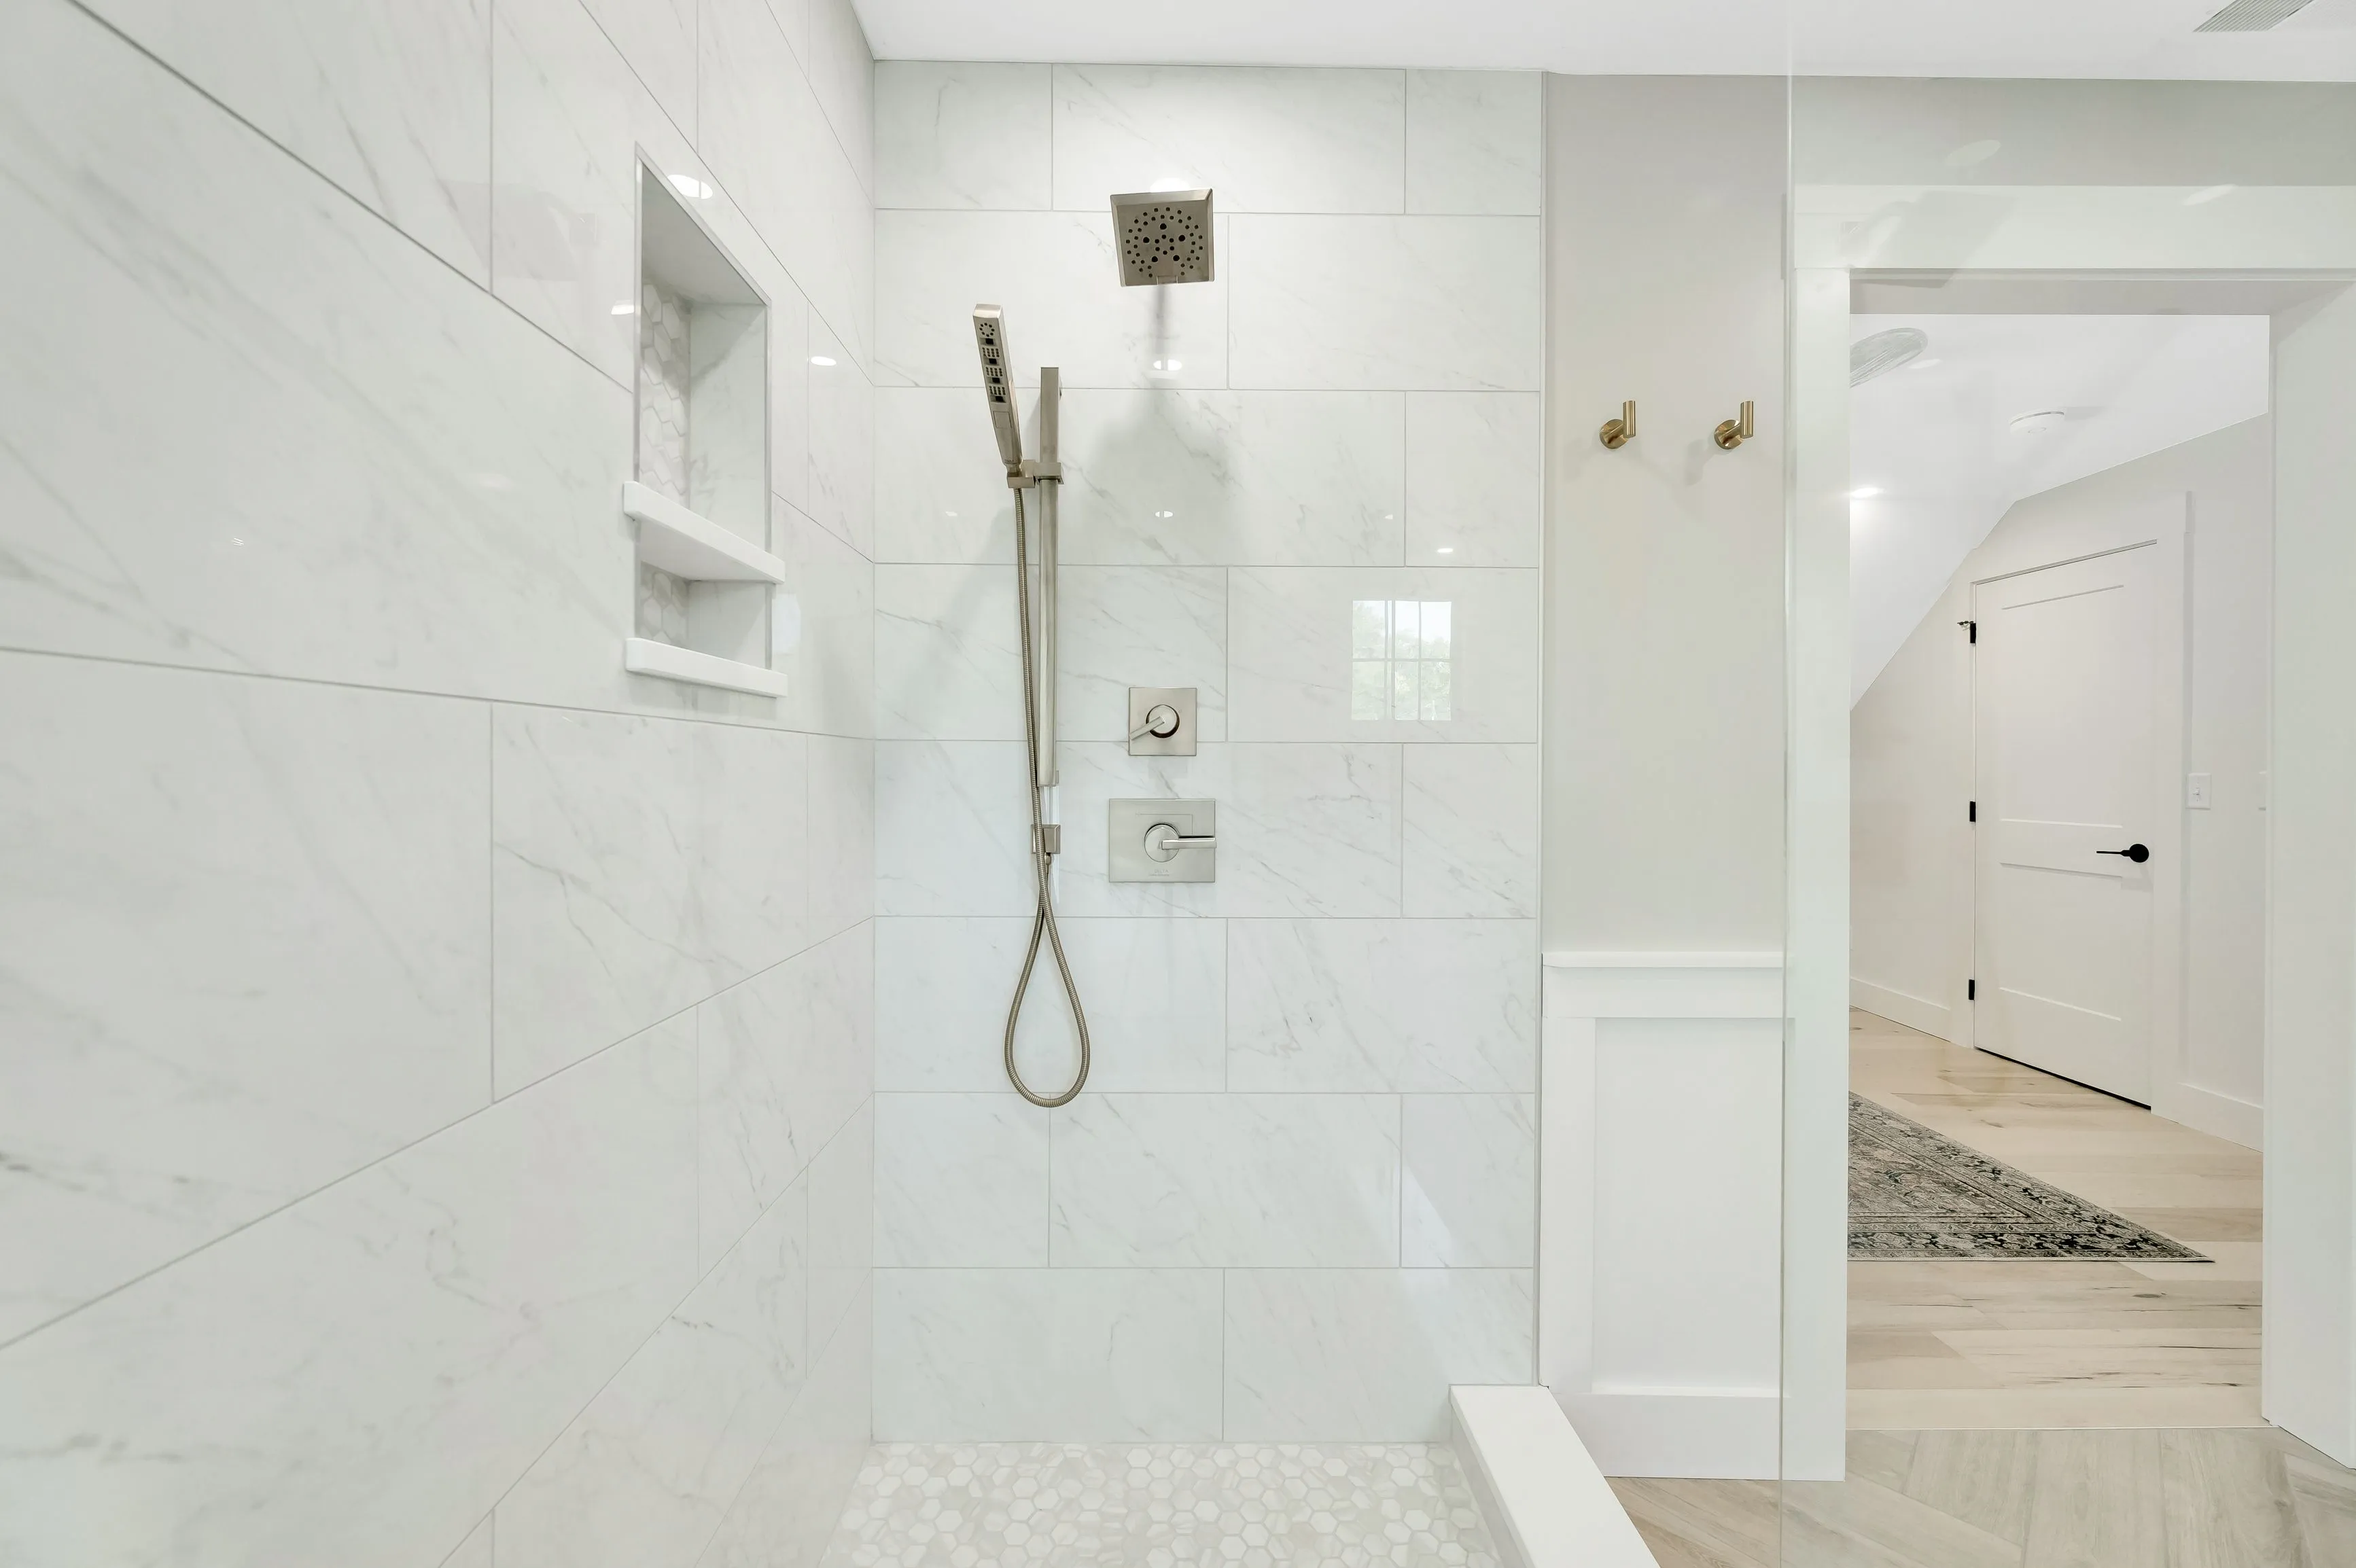 Modern bathroom interior with glass door walk-in shower, marble tiles, built-in wall shelf, and rainfall shower head.